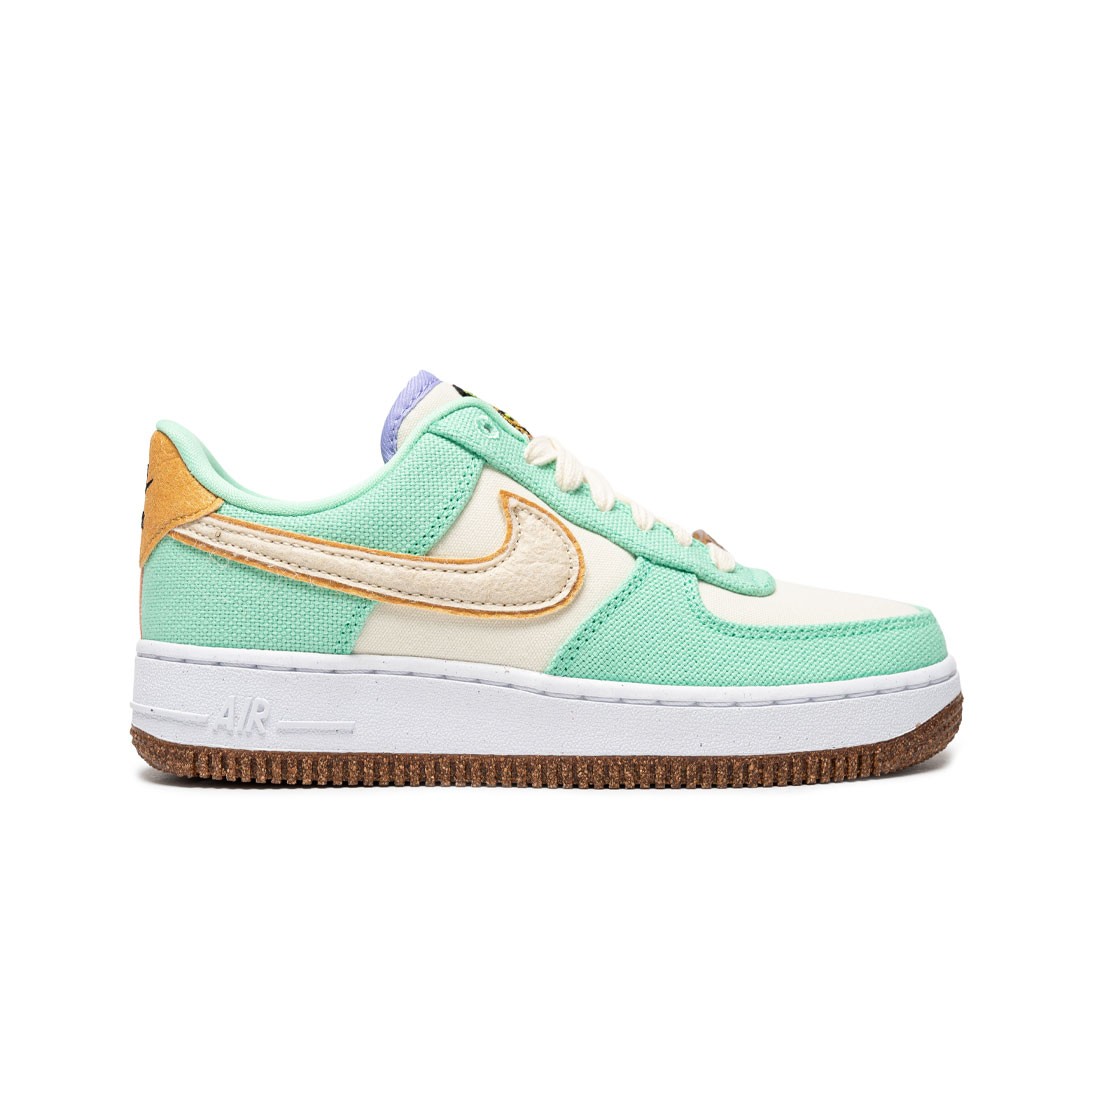 NIKE AIR FORCE 1 '07 TRIPLE WHITE GREEN WOMEN/GIRL GS MULTI SIZE *NEW * AF1